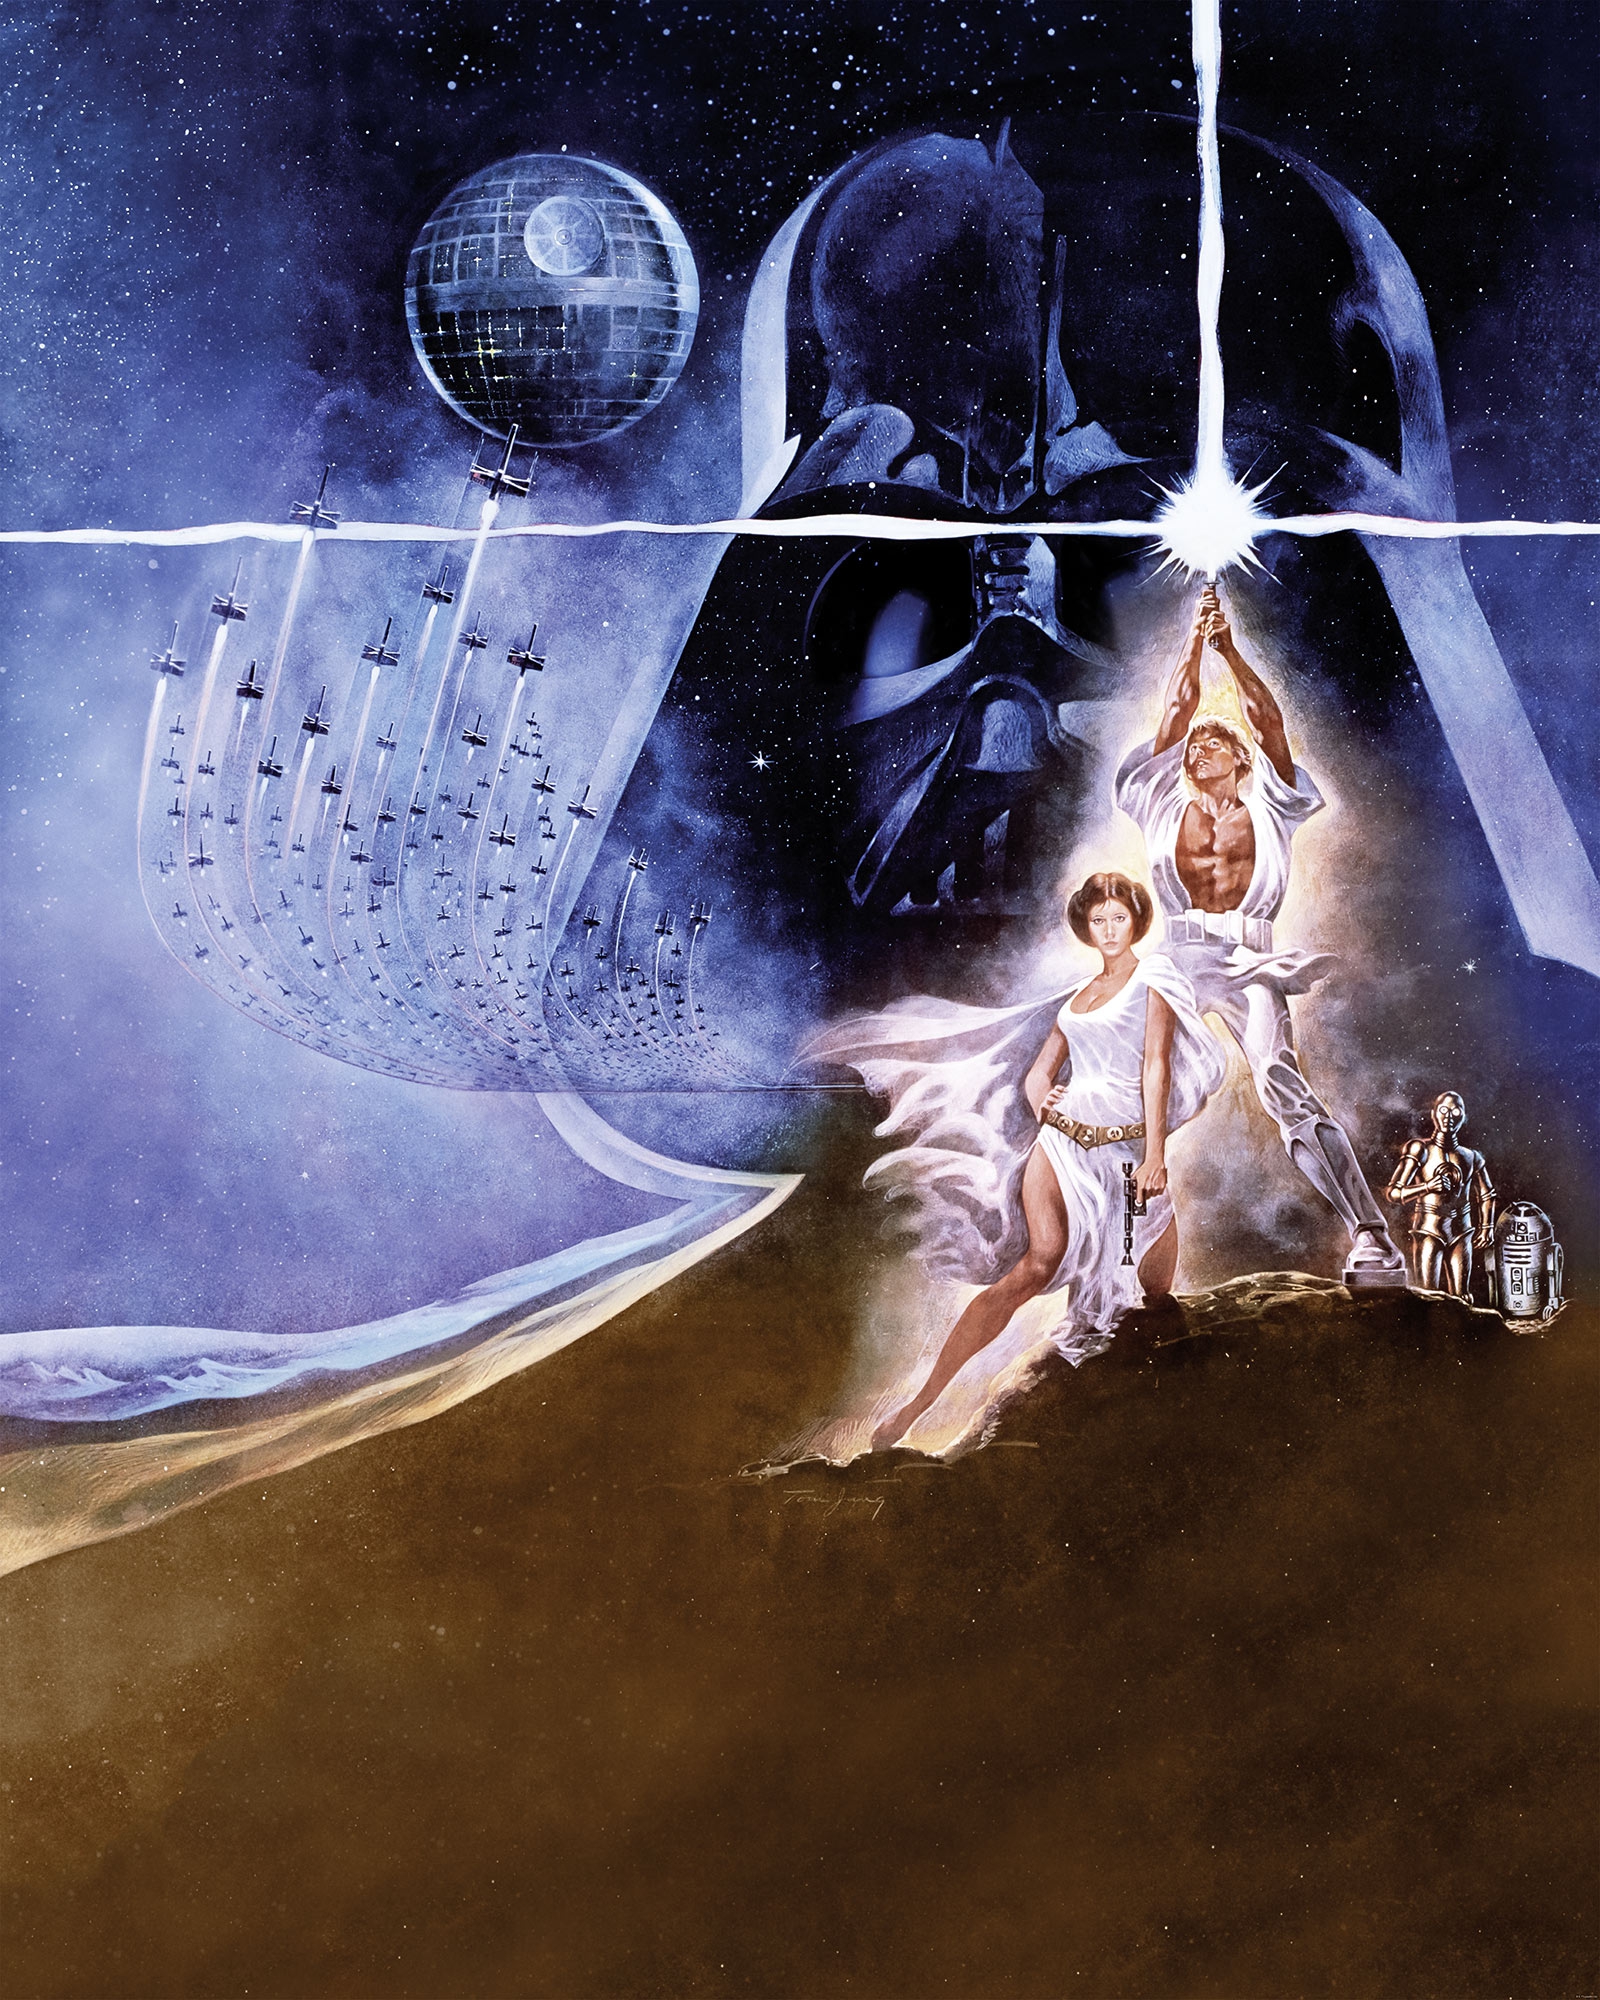 Non-woven photomural Star Wars Poster Classic 2 from Komar